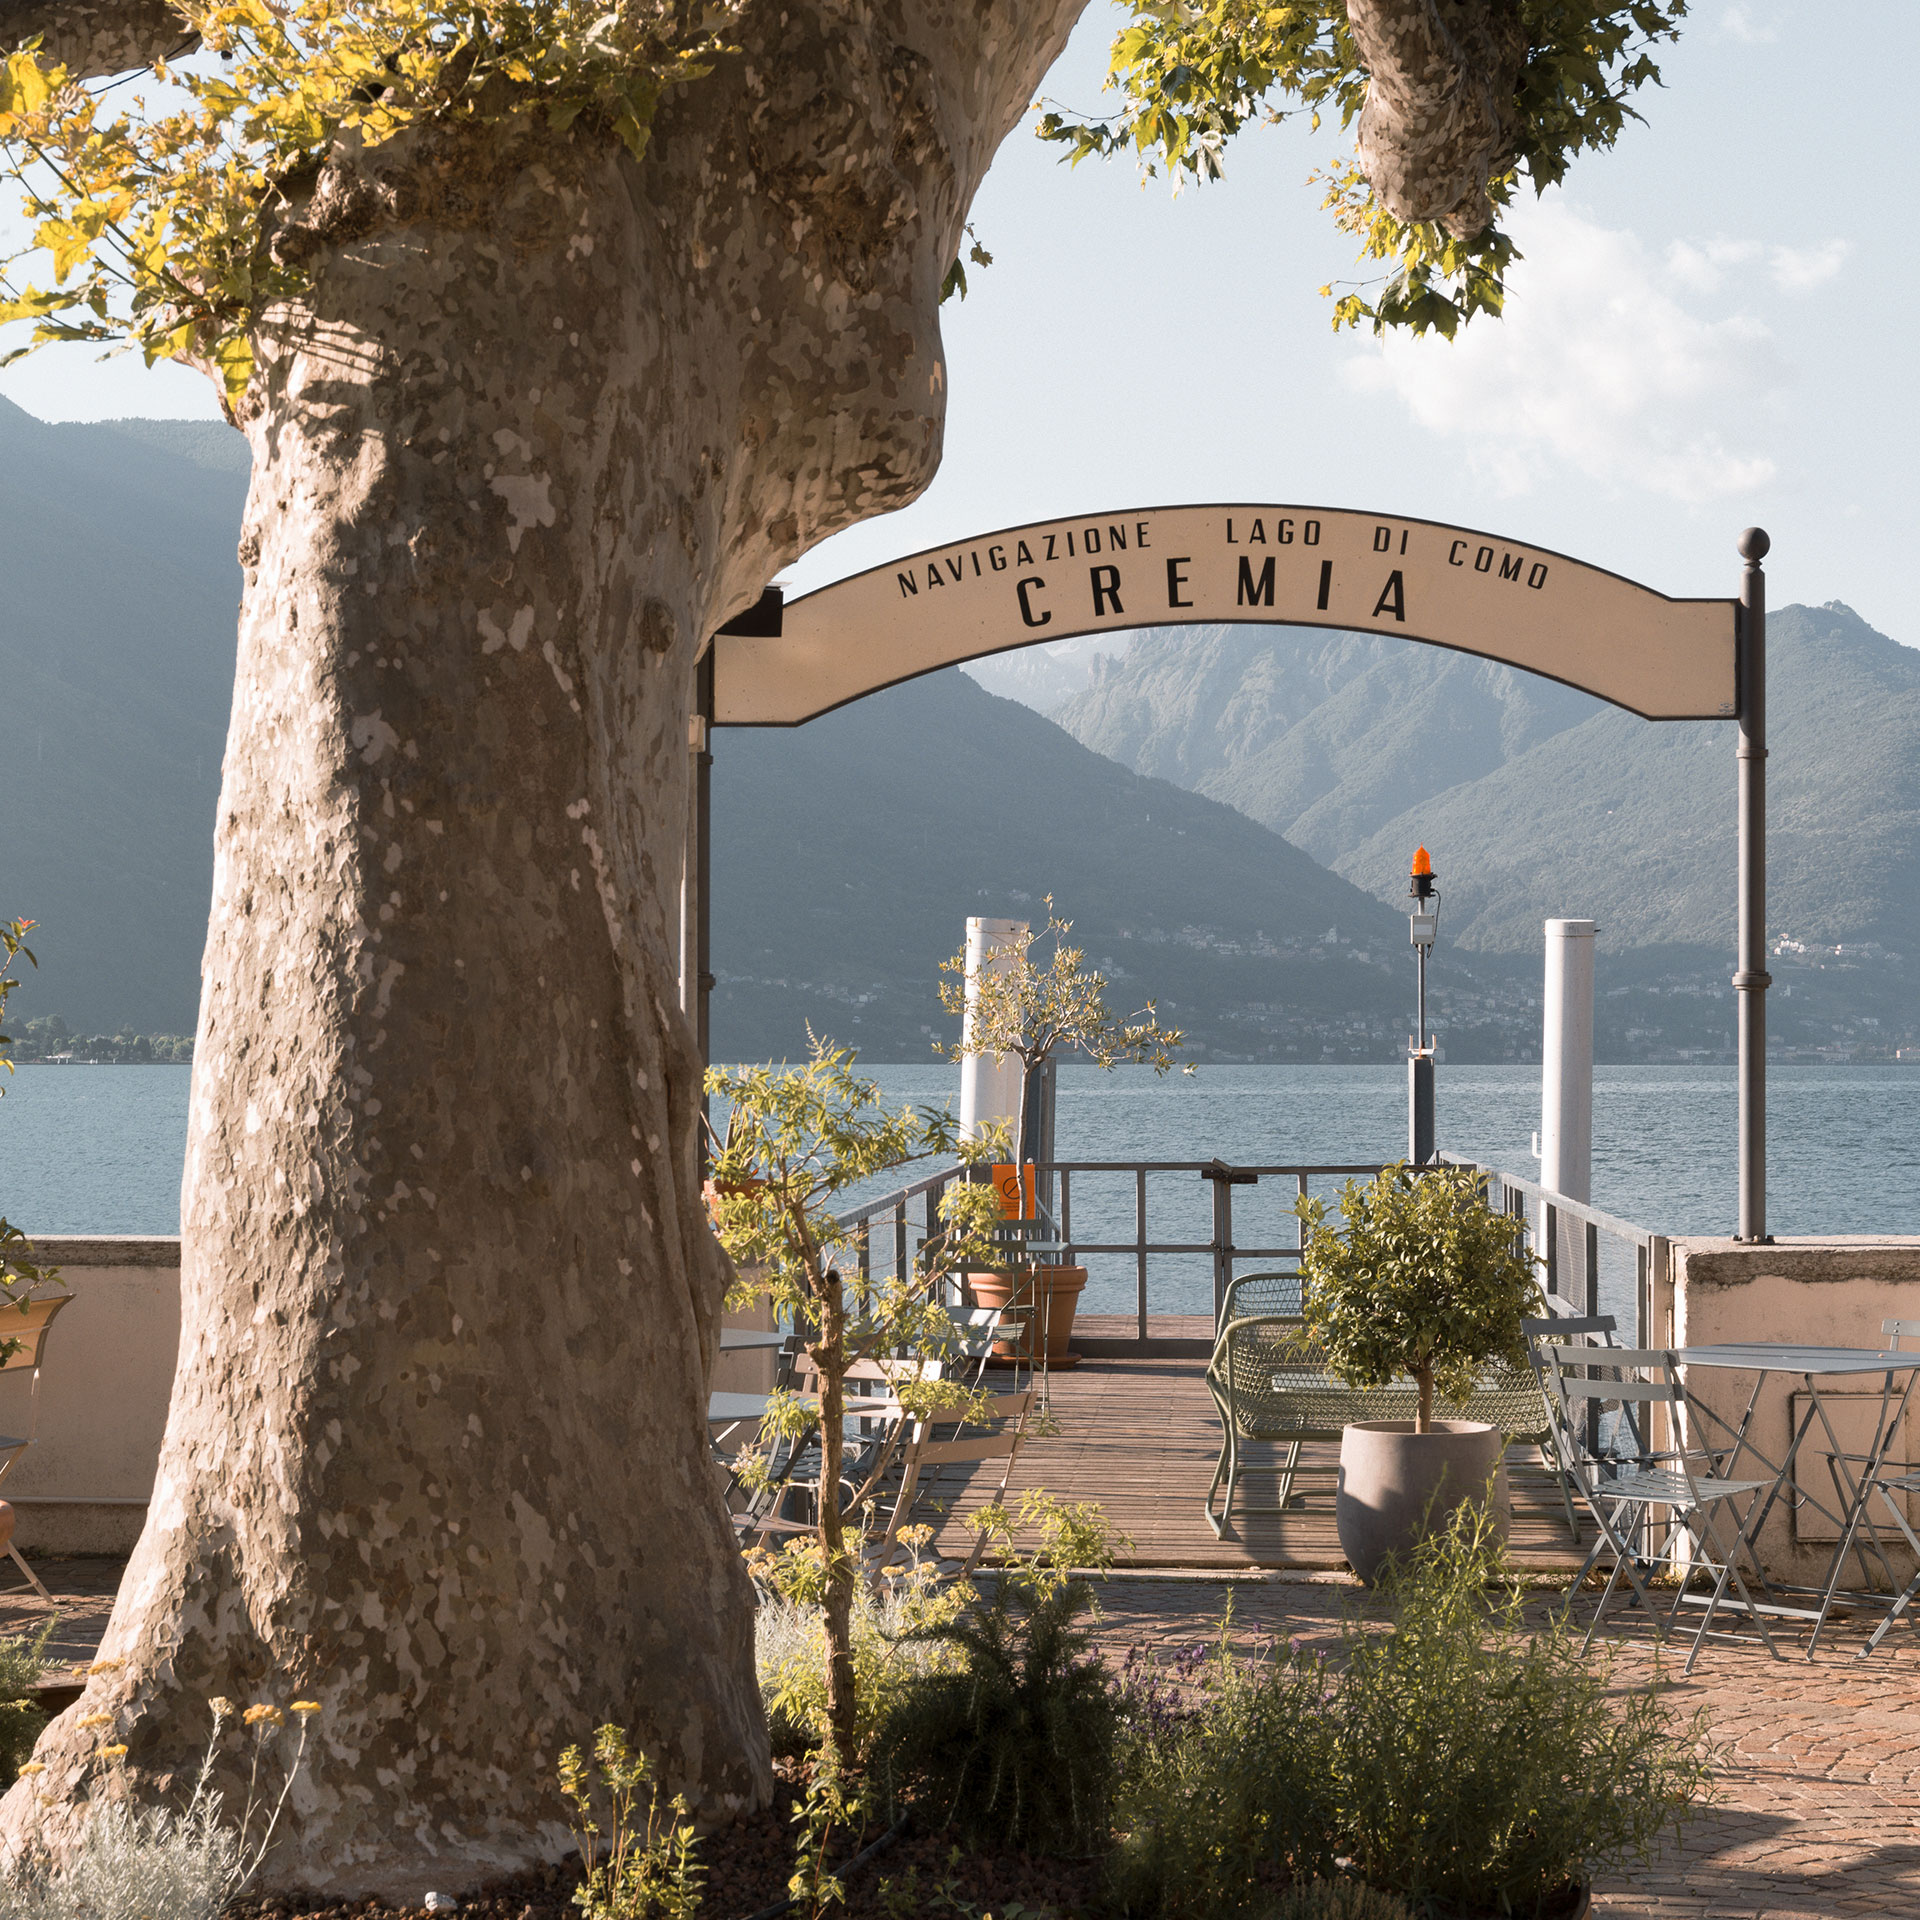 Casa Olea Hotel is a renovated old vicarage located in Cremia, Lake Como - Italy, strategically positioned to experience the Lake Como from the water side. Trekking paths, bike trails, kite surfing and boat rentals are a not to be missed opportunity to experience the lake.